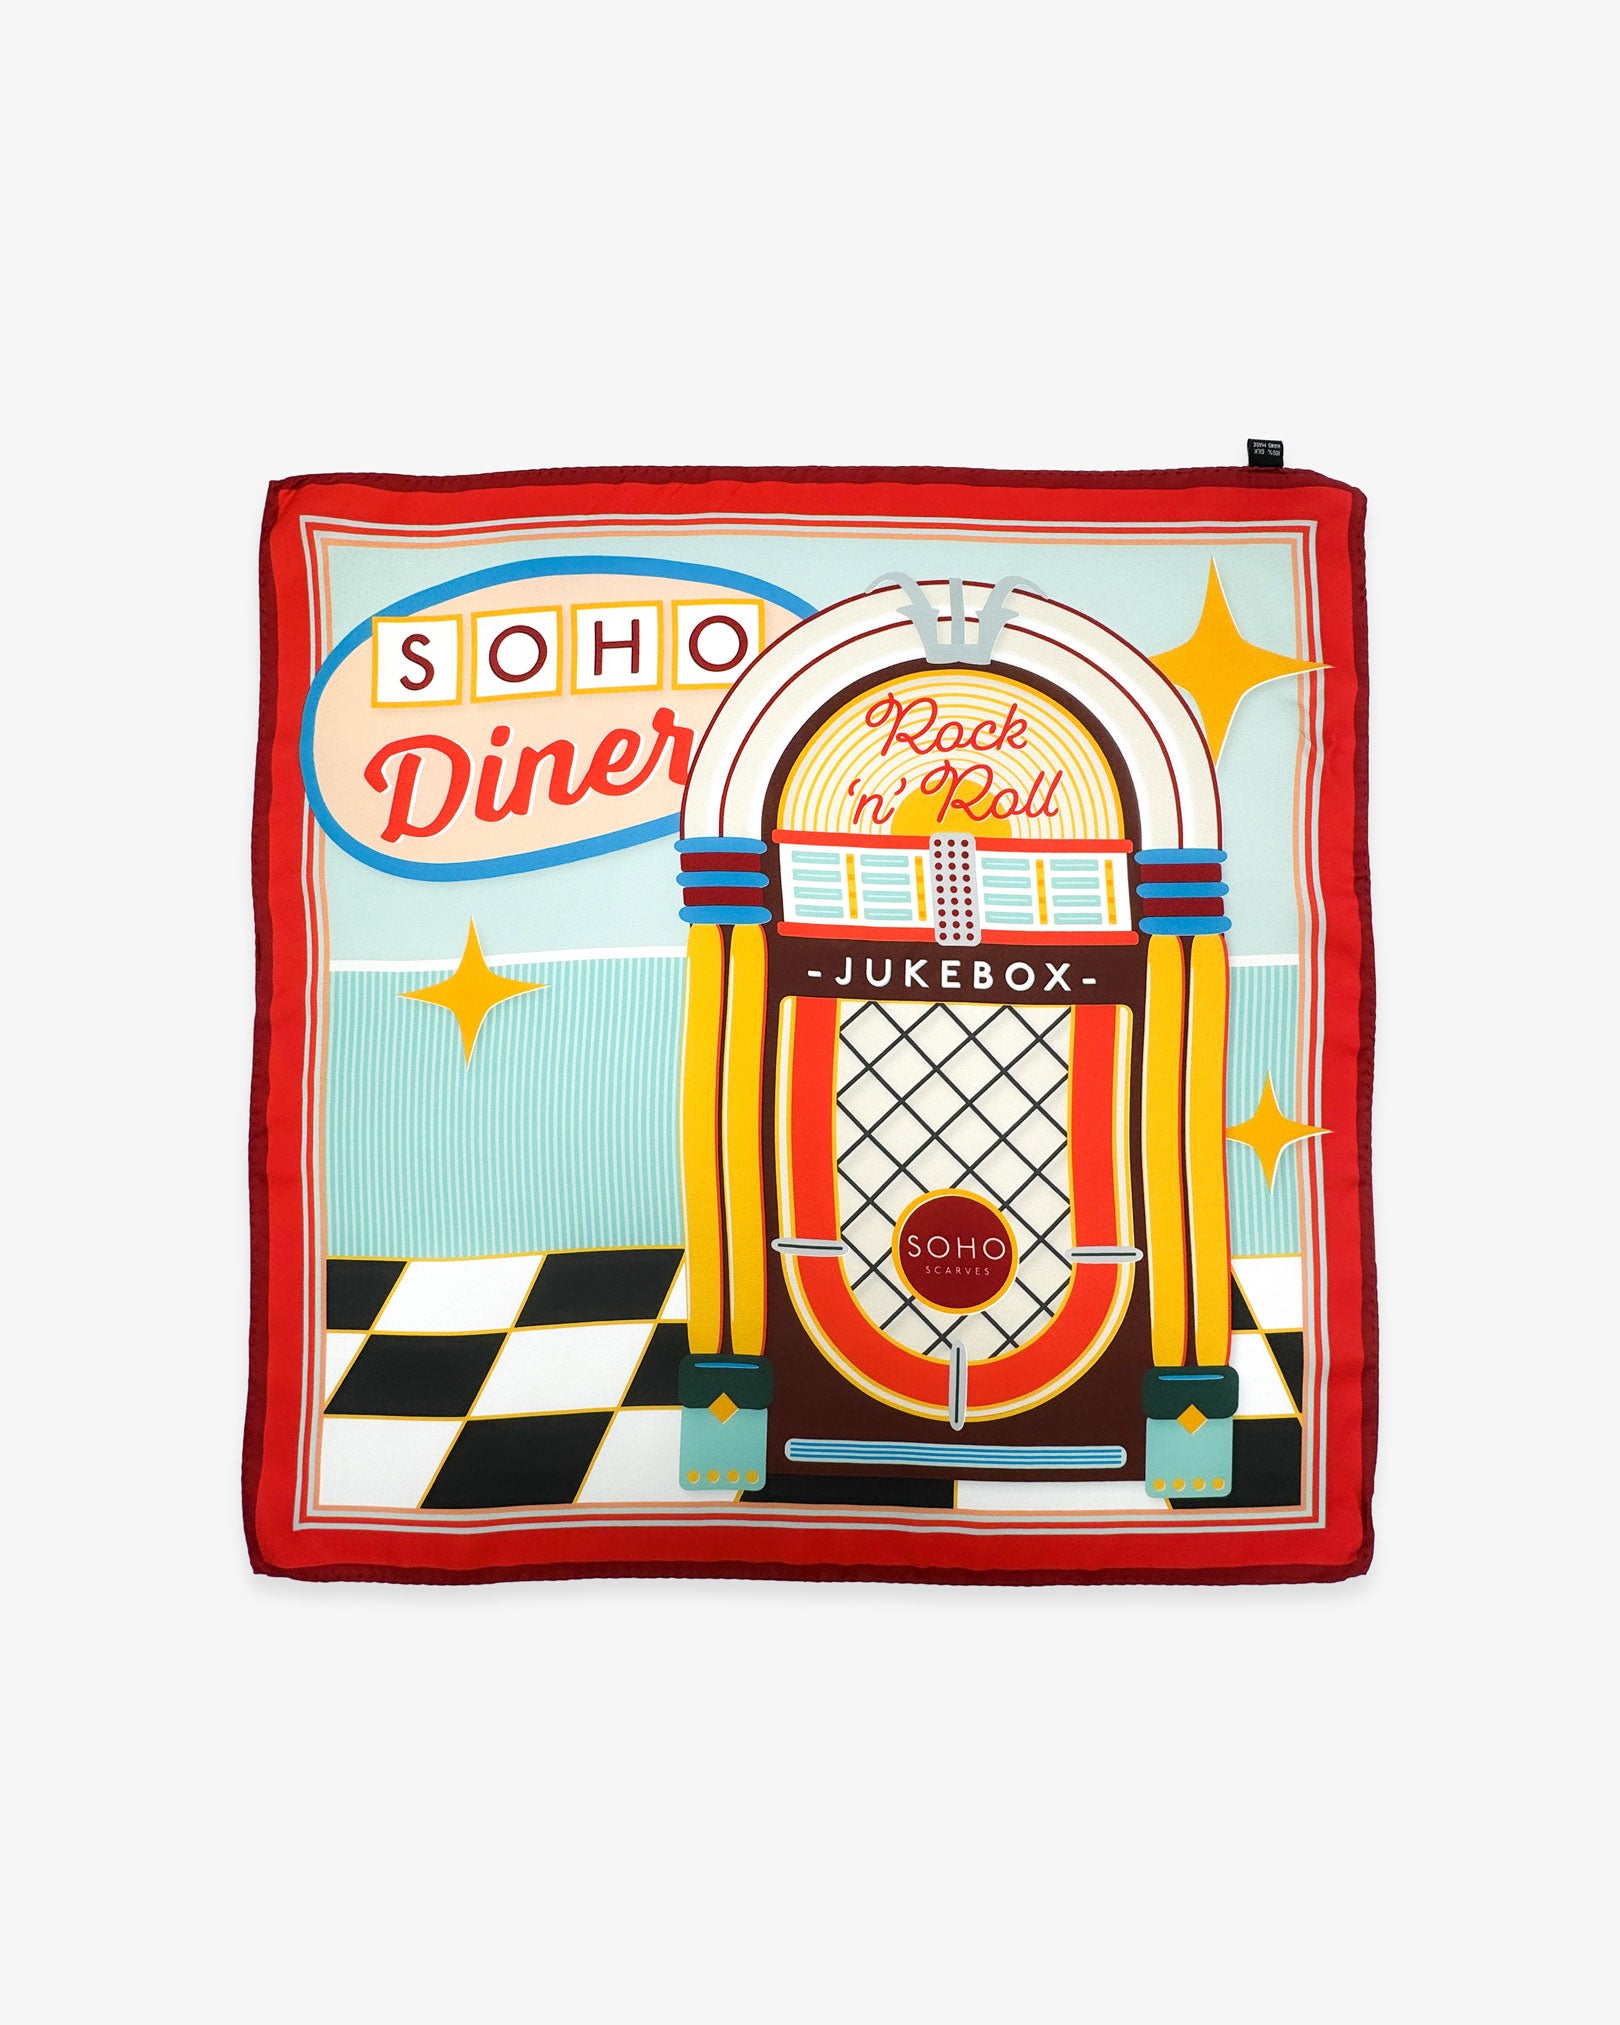 Fully unfolded 'Jukebox 2' silk headscarf, showing the 1950's jukebox, chequered floor and retro 'SOHO Diner' signage design using a classic 1950's colour palette.